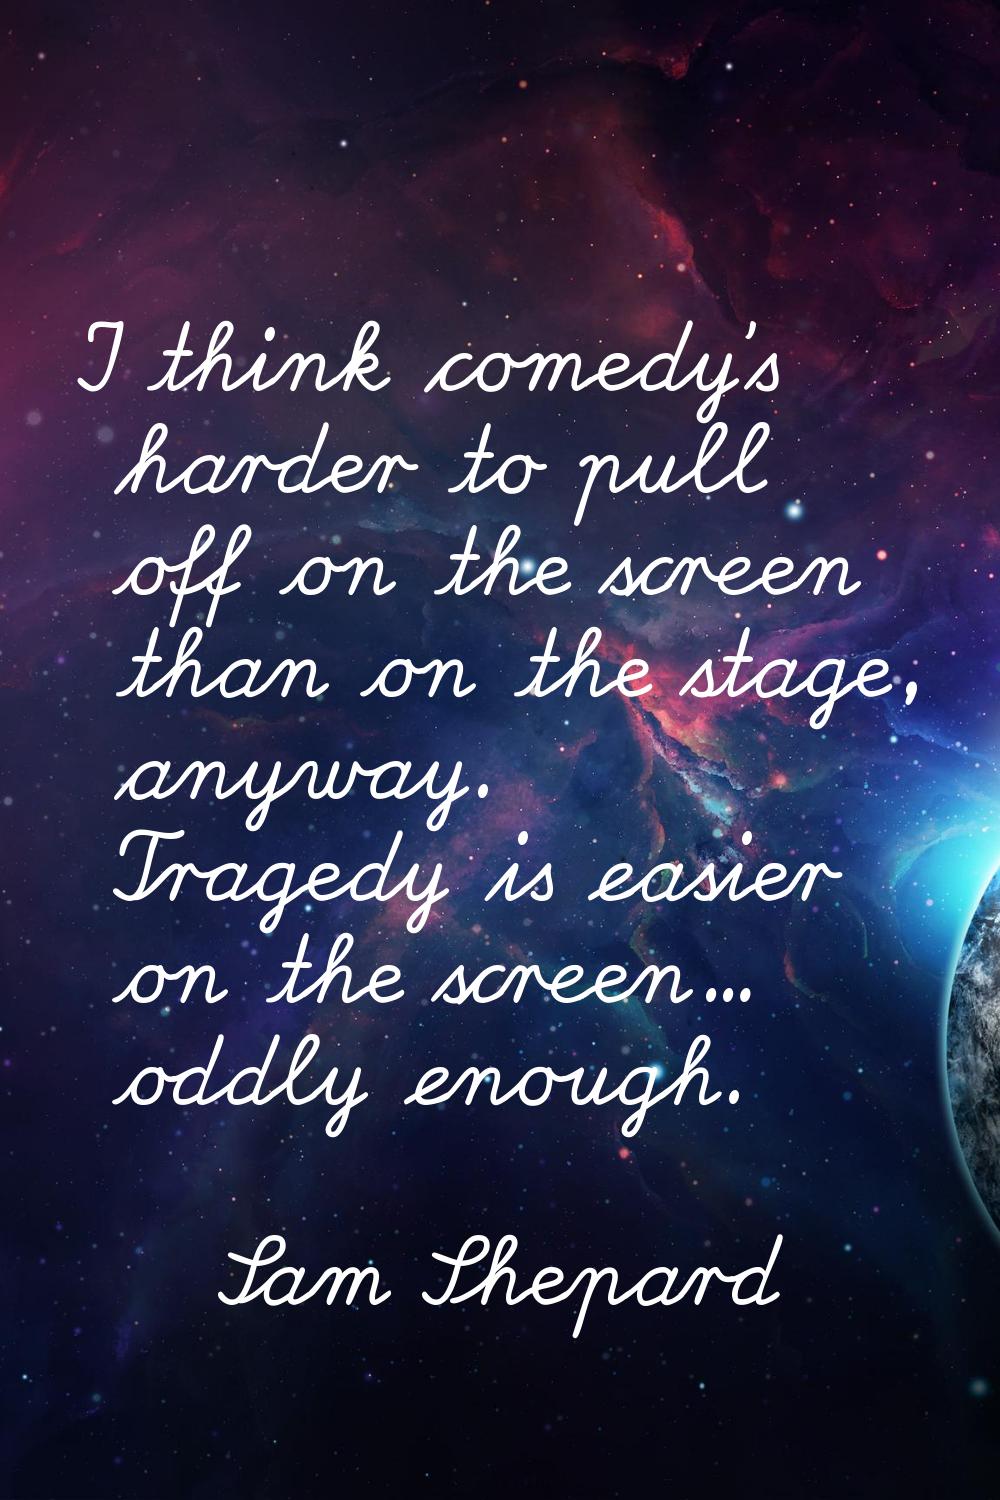 I think comedy's harder to pull off on the screen than on the stage, anyway. Tragedy is easier on t